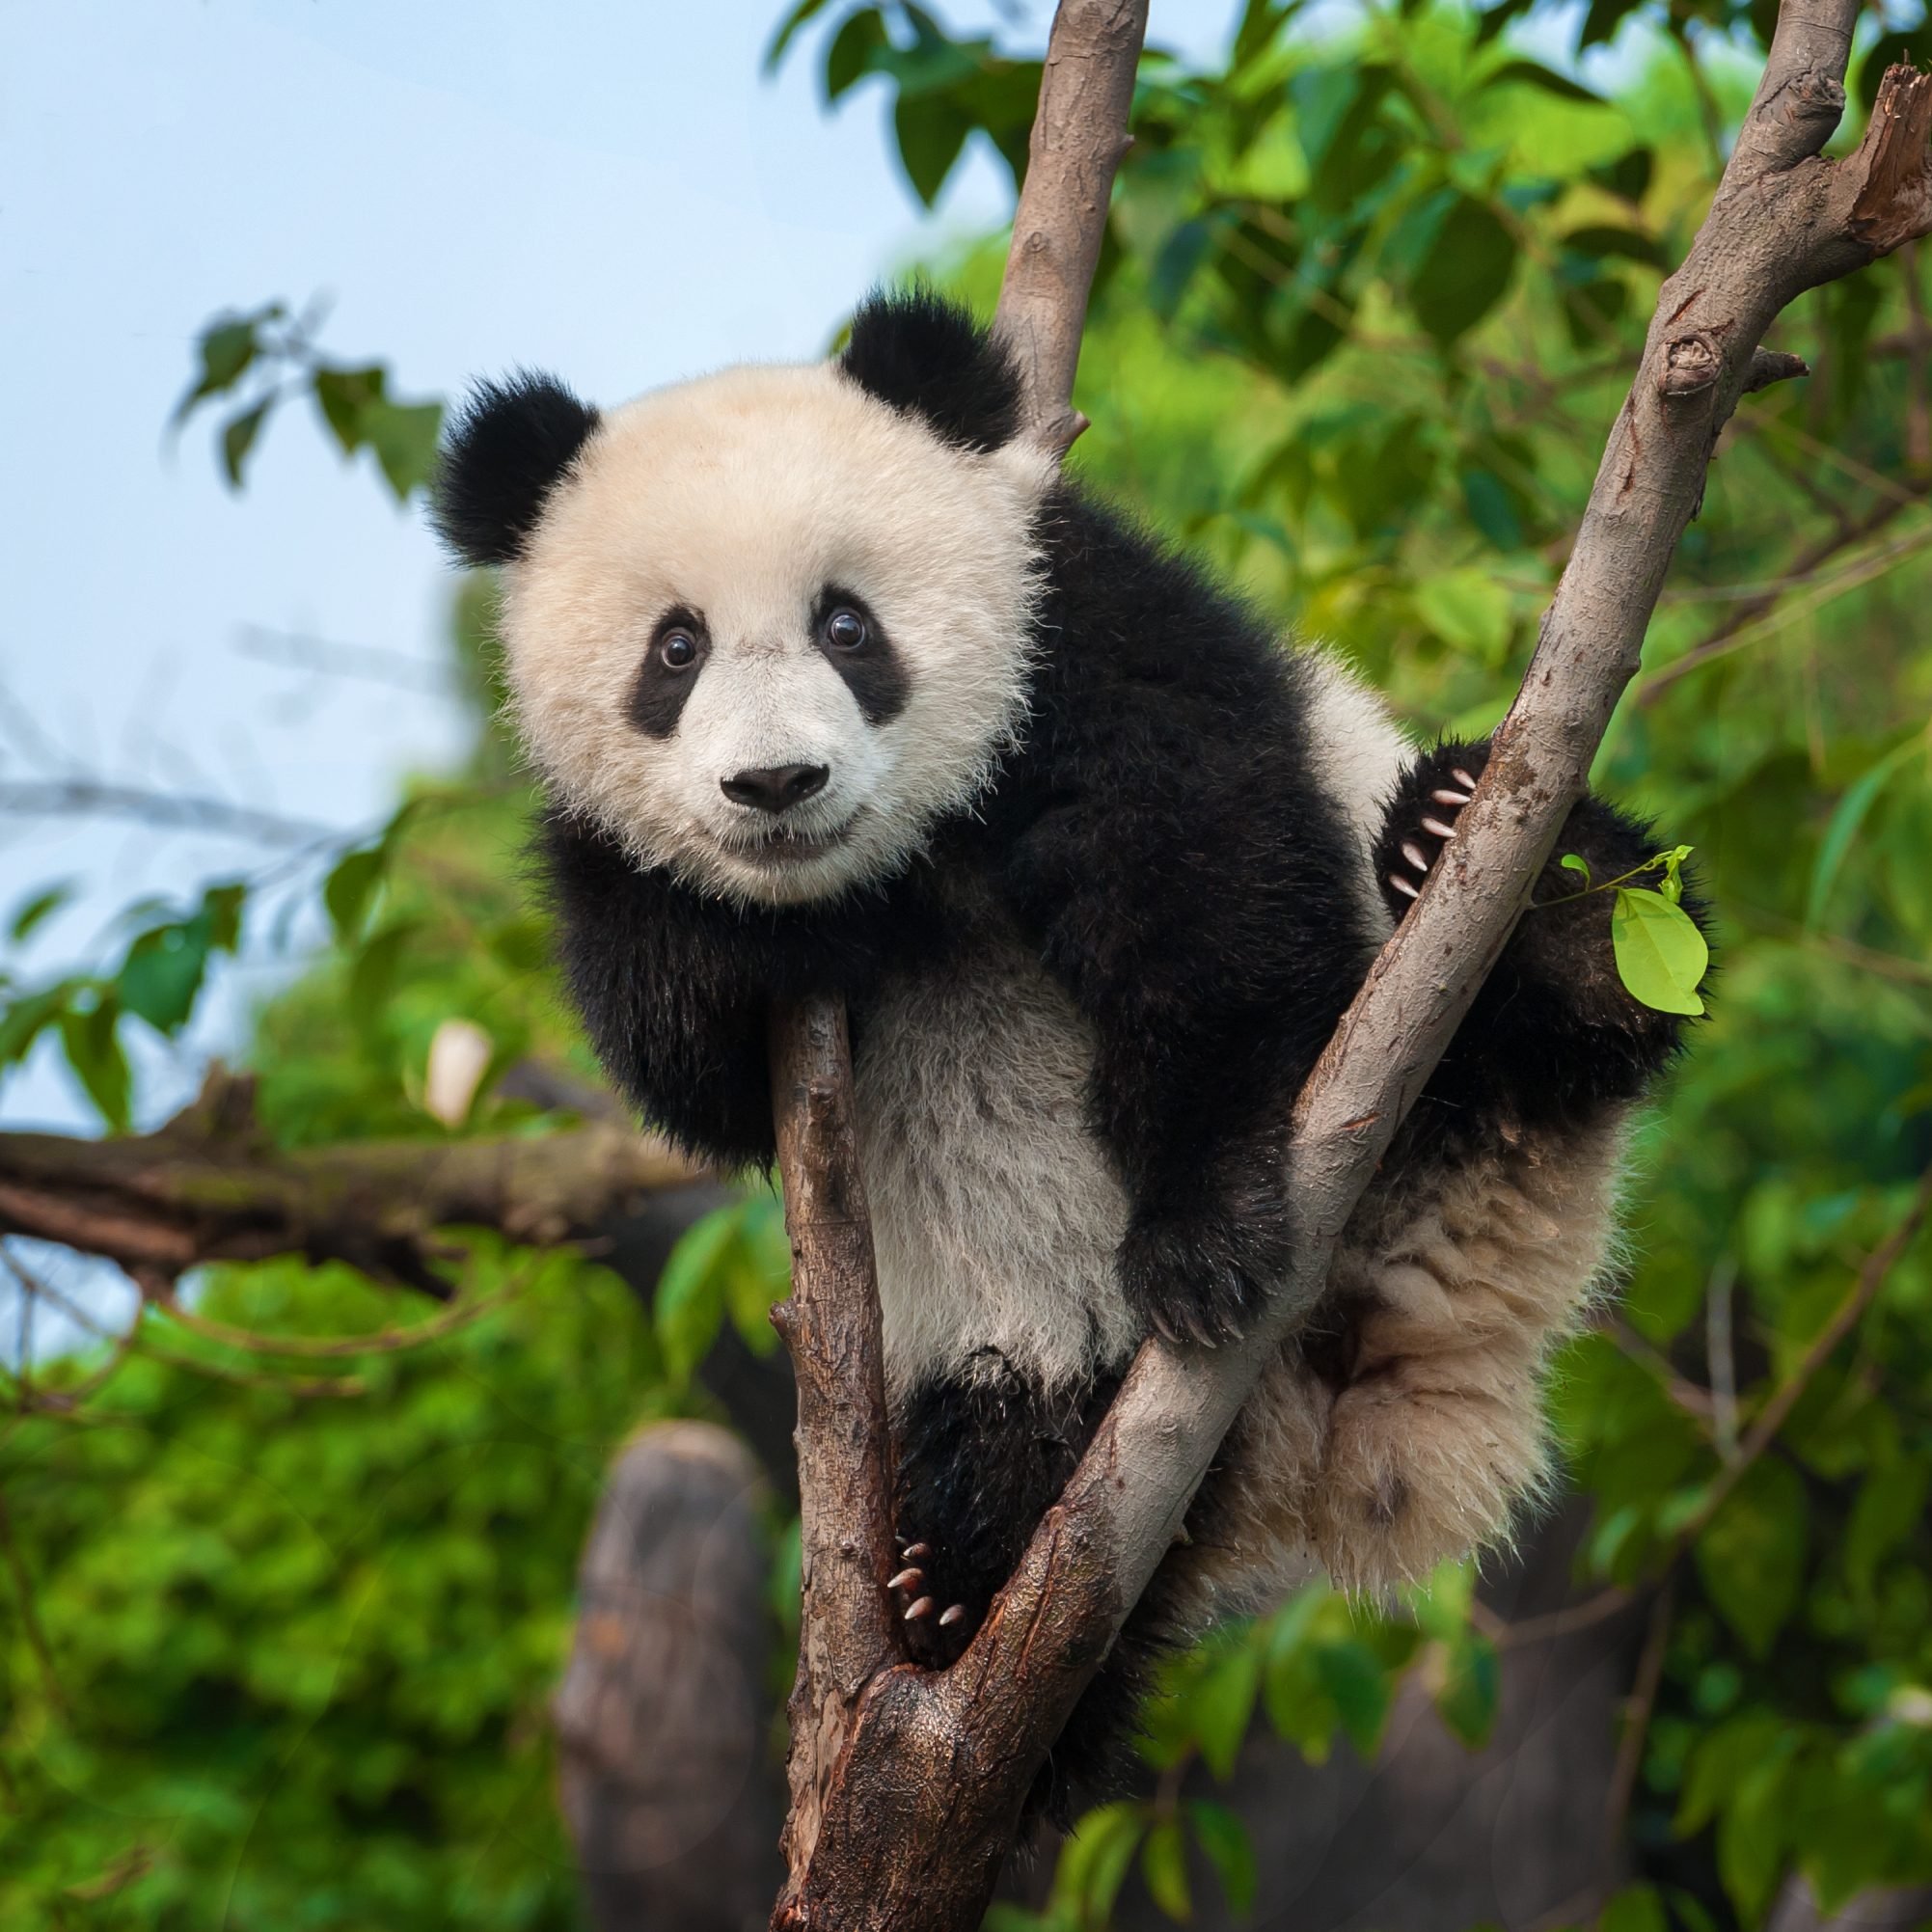 How many pandas are left in the world 2020?